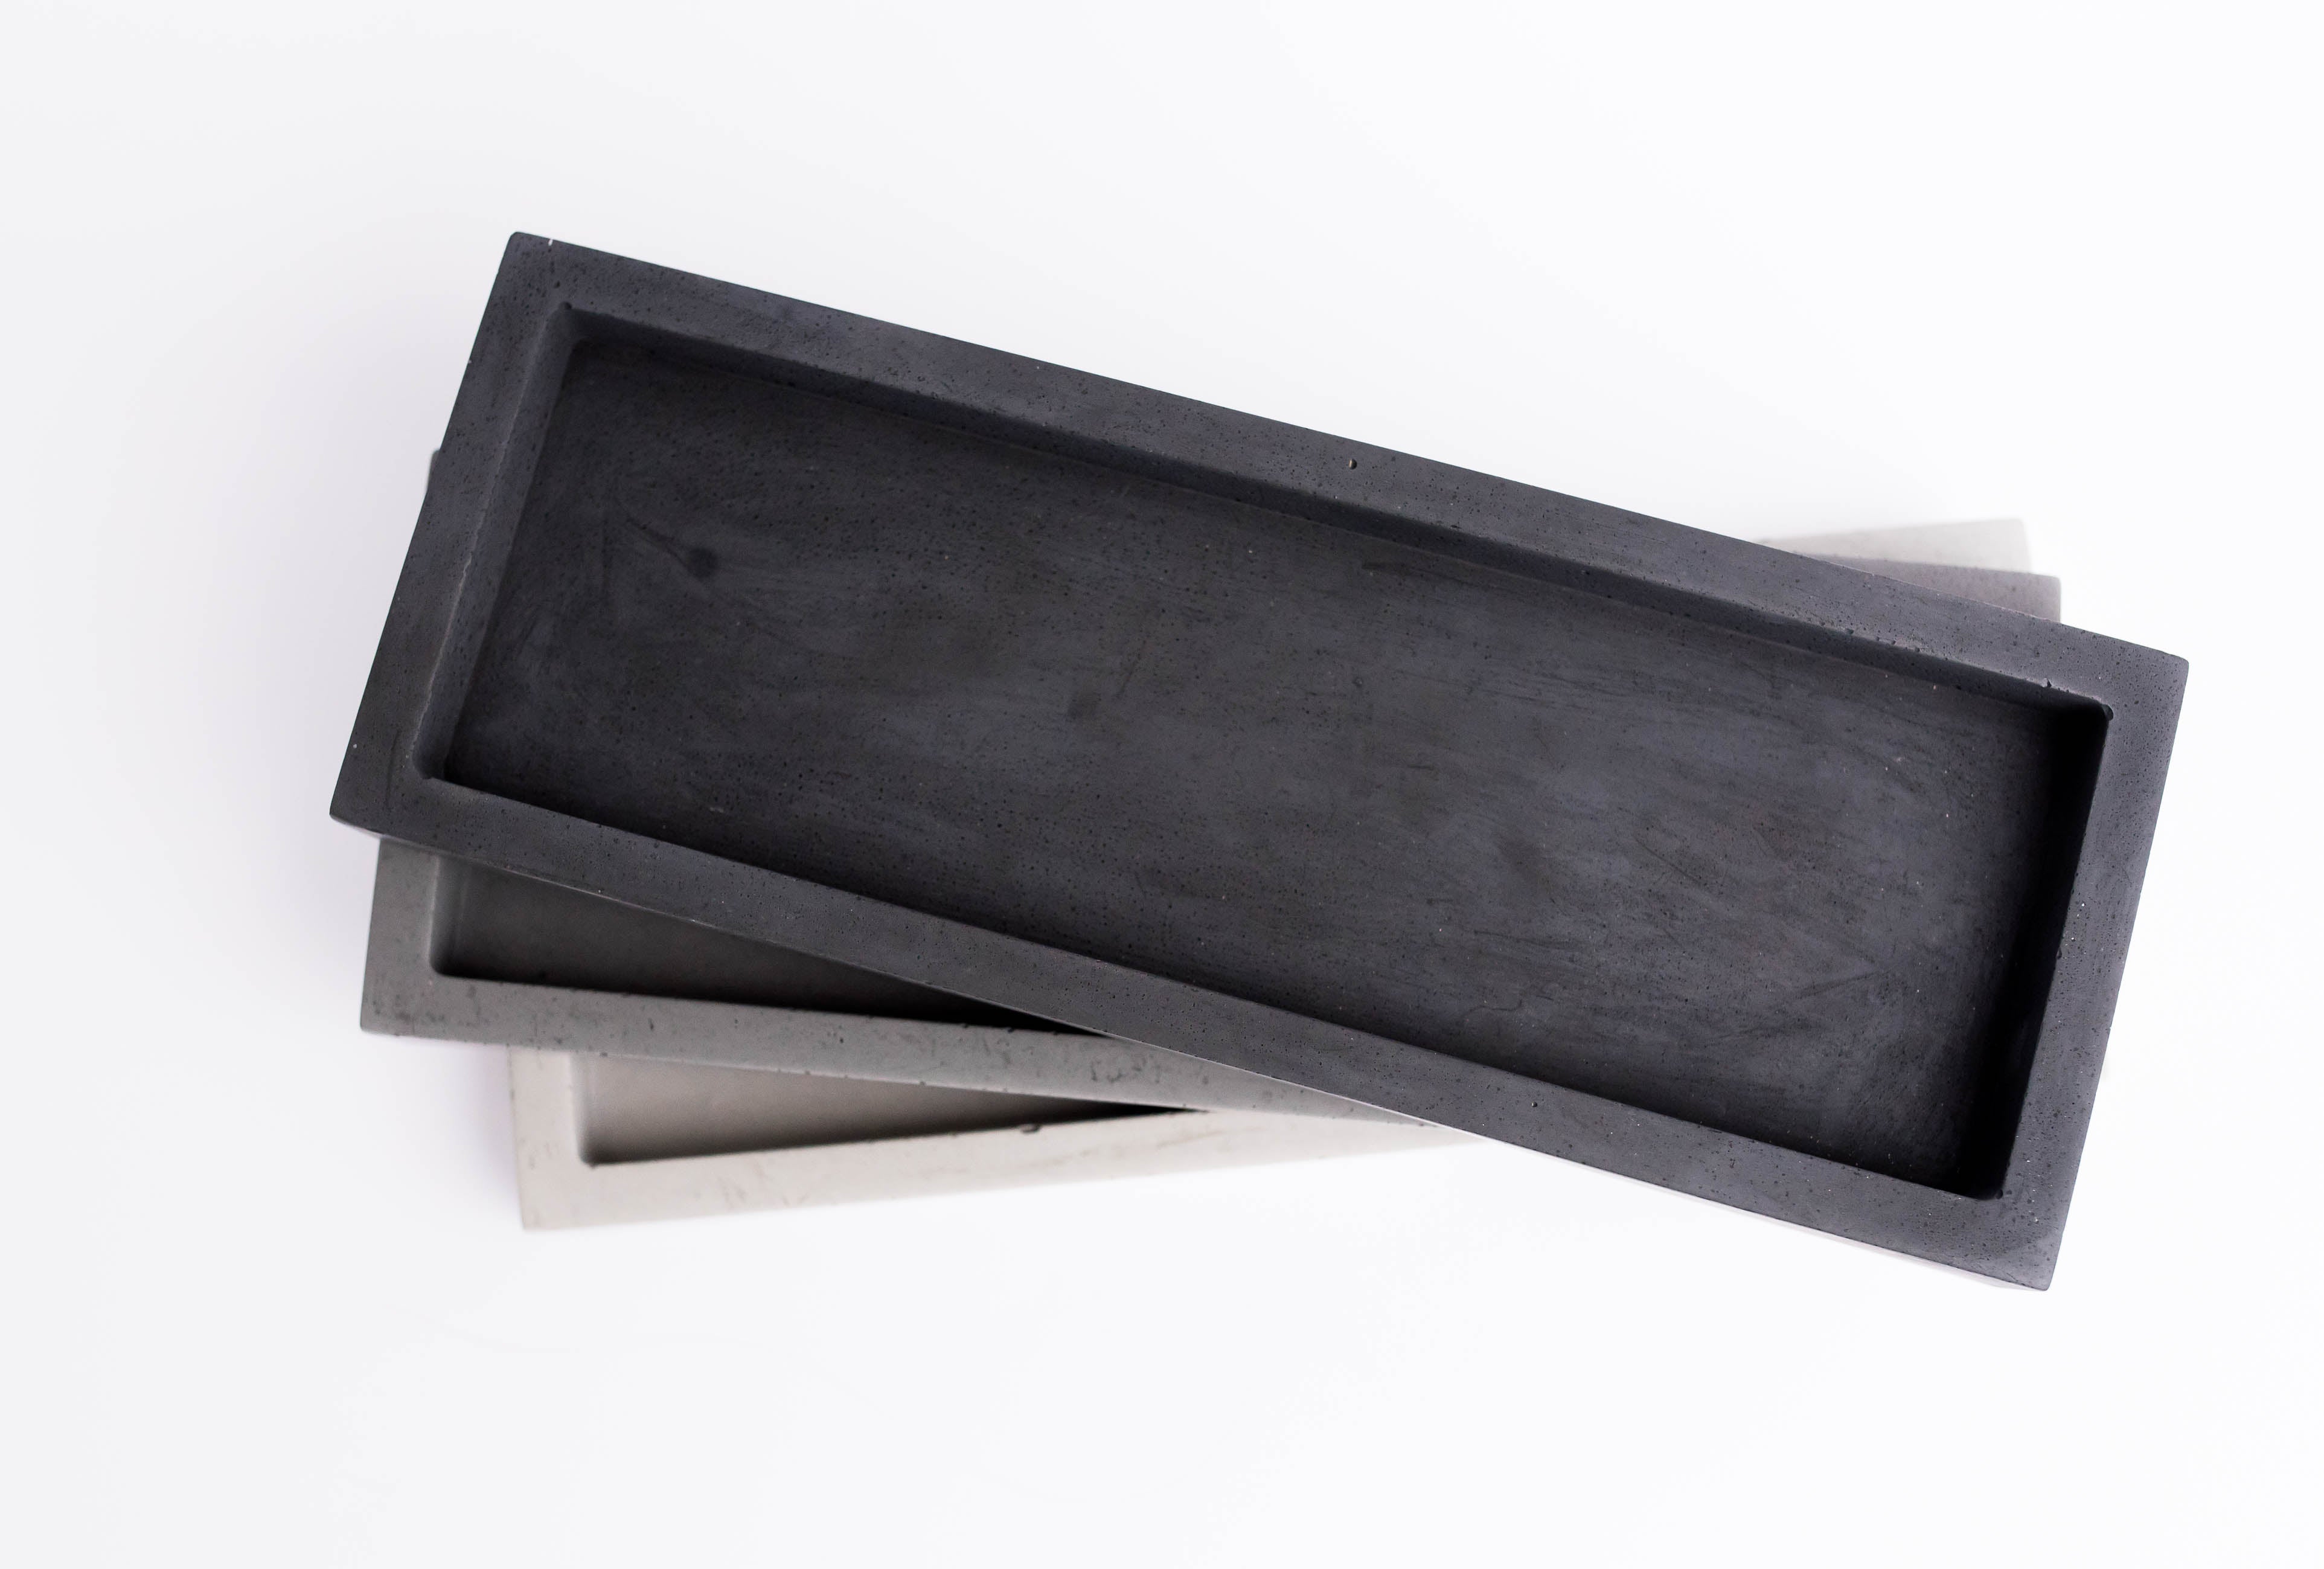 Rectangular Concrete Tray - made by kippen